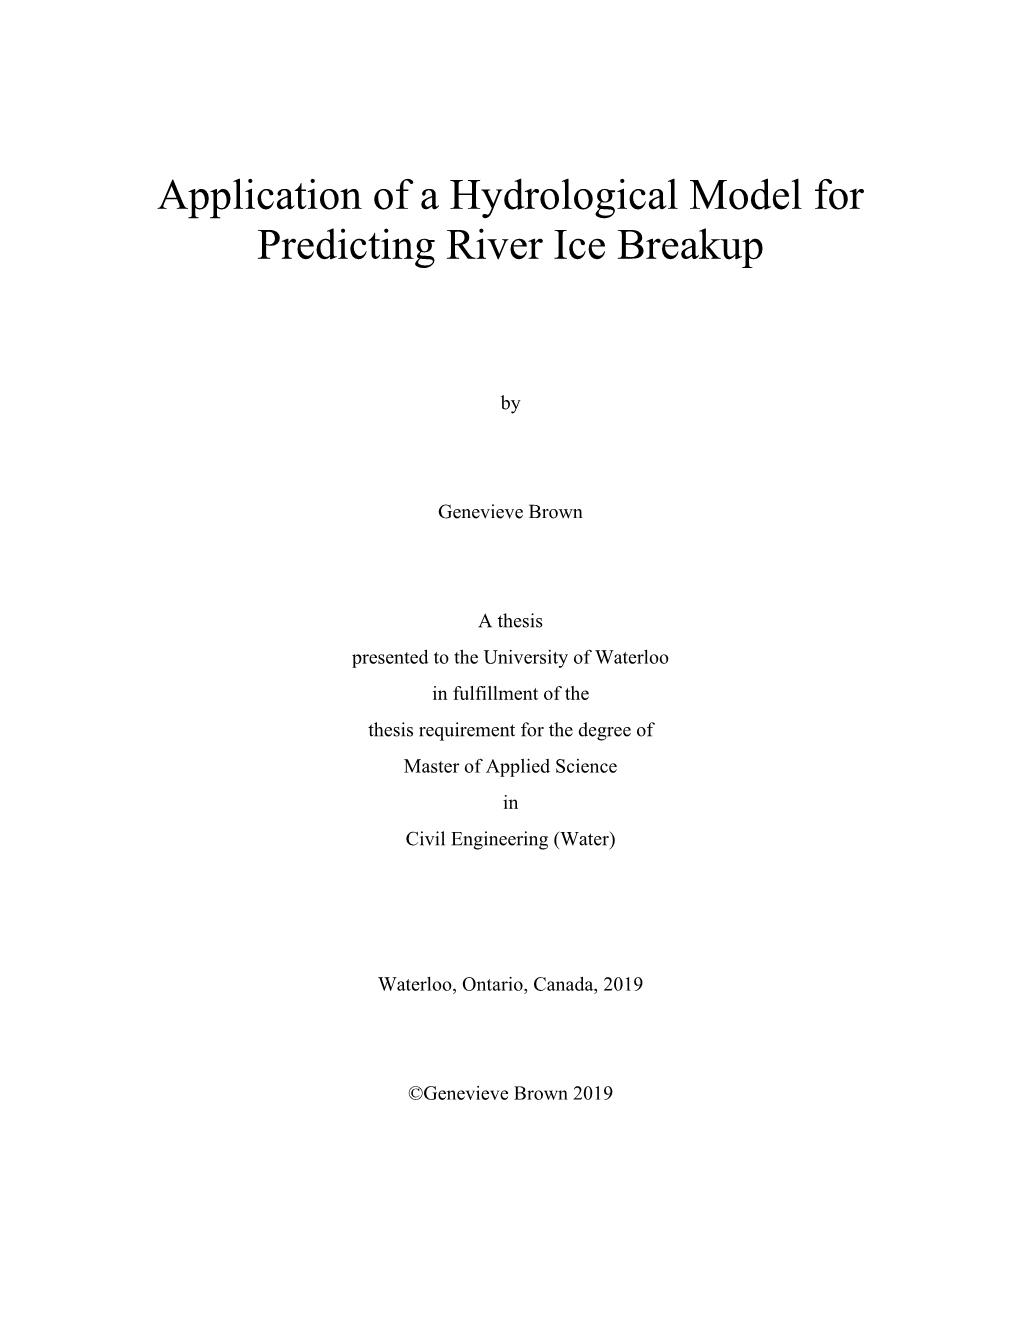 Application of a Hydrological Model for Predicting River Ice Breakup